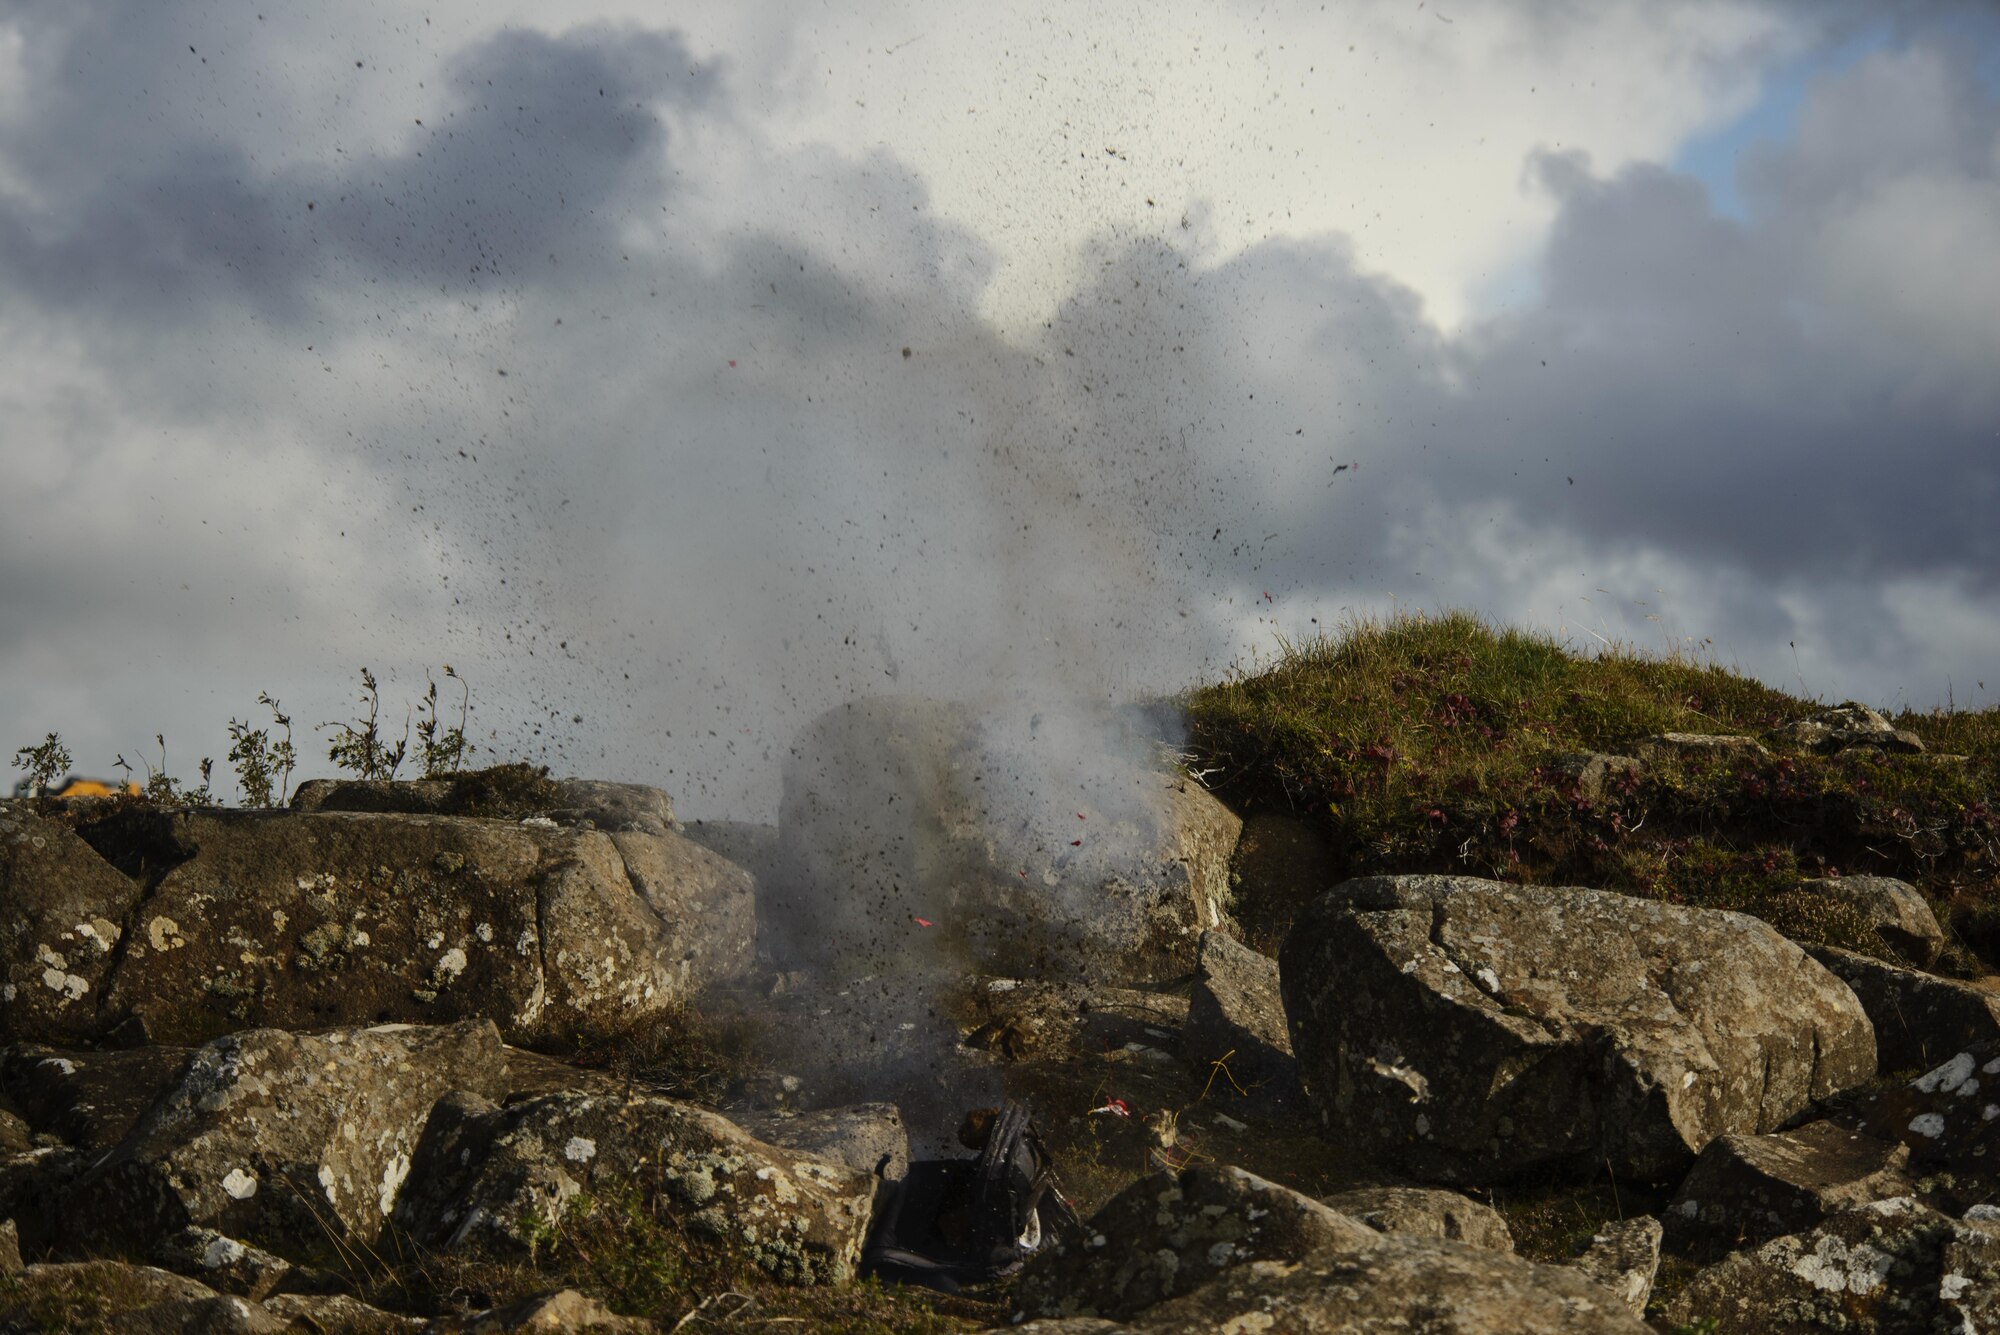 An improvised explosive device is detonated during the Northern Challenge 16 exercise at Icelandic Coast Guard Keflavik Facility, Iceland, Sept. 19, 2016. The exercise focused on disabling IEDs in support of counter-terrorism tactics to prepare Partnership for Peace, NATO, and Nordic nations for international deployments and defense against terrorism. (U.S. Air Force photo by Staff Sgt. Jonathan Snyder)                                        